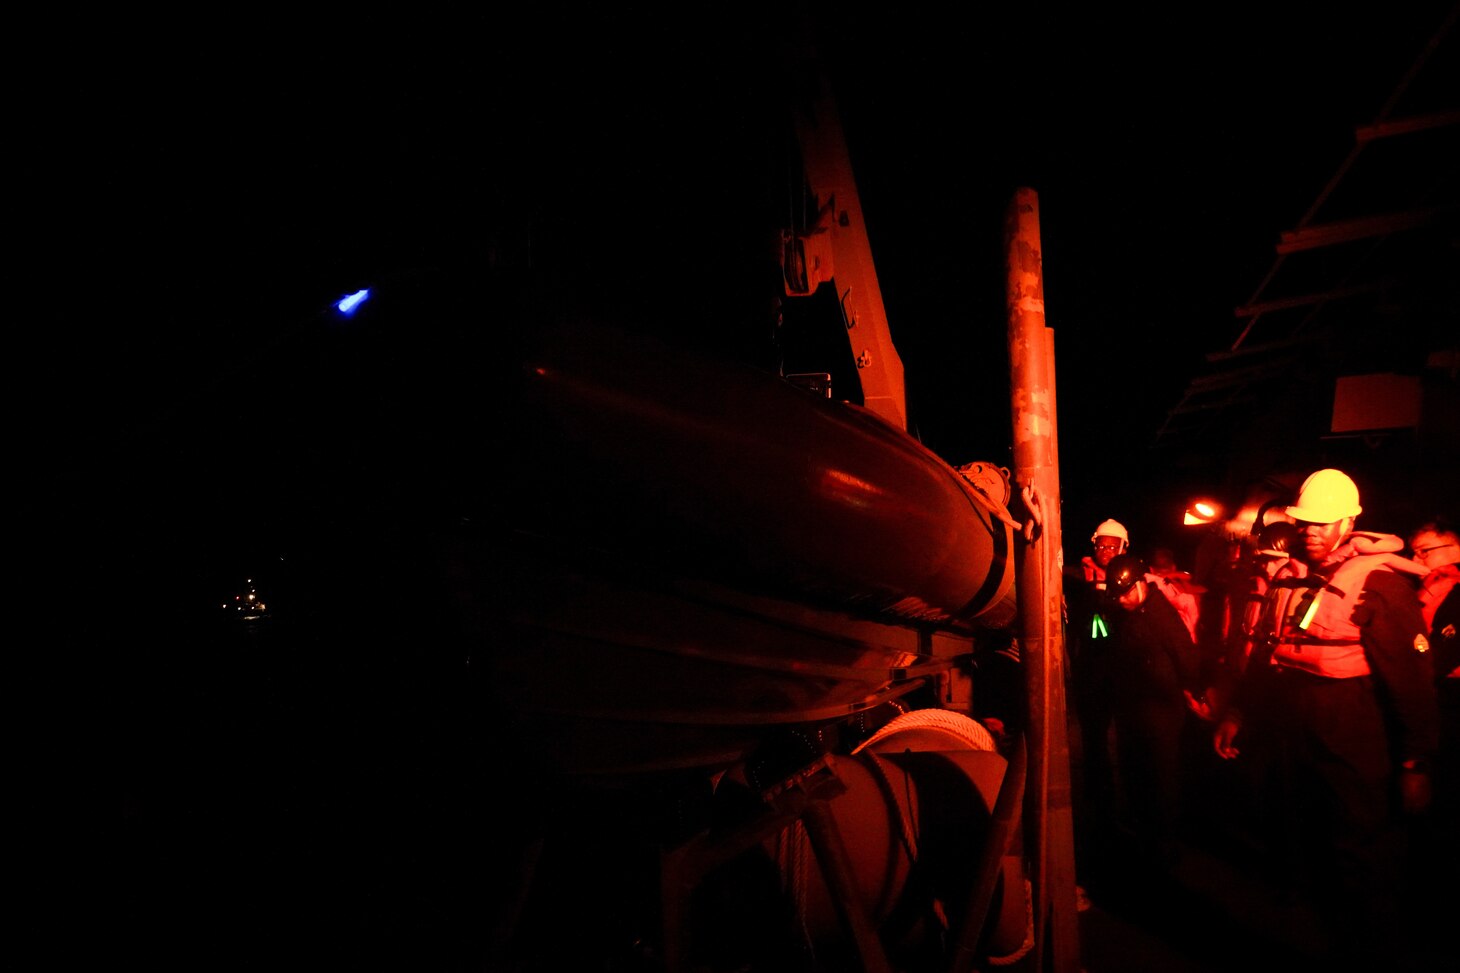 Sailors assigned to the Arleigh Burke-class guided-missile destroyer USS Porter (DDG 78) prepare to launch a rigid hull inflatable boat to transfer rescued civilian divers to United States Coast Guard 115 47 FT Motor Lifeboat CG47287 off the coast of Wilmington, N.C. Porter’s assistance in rescuing the divers is an example of the U.S. Navy’s unique multi-role mission to ensuring safety at sea.